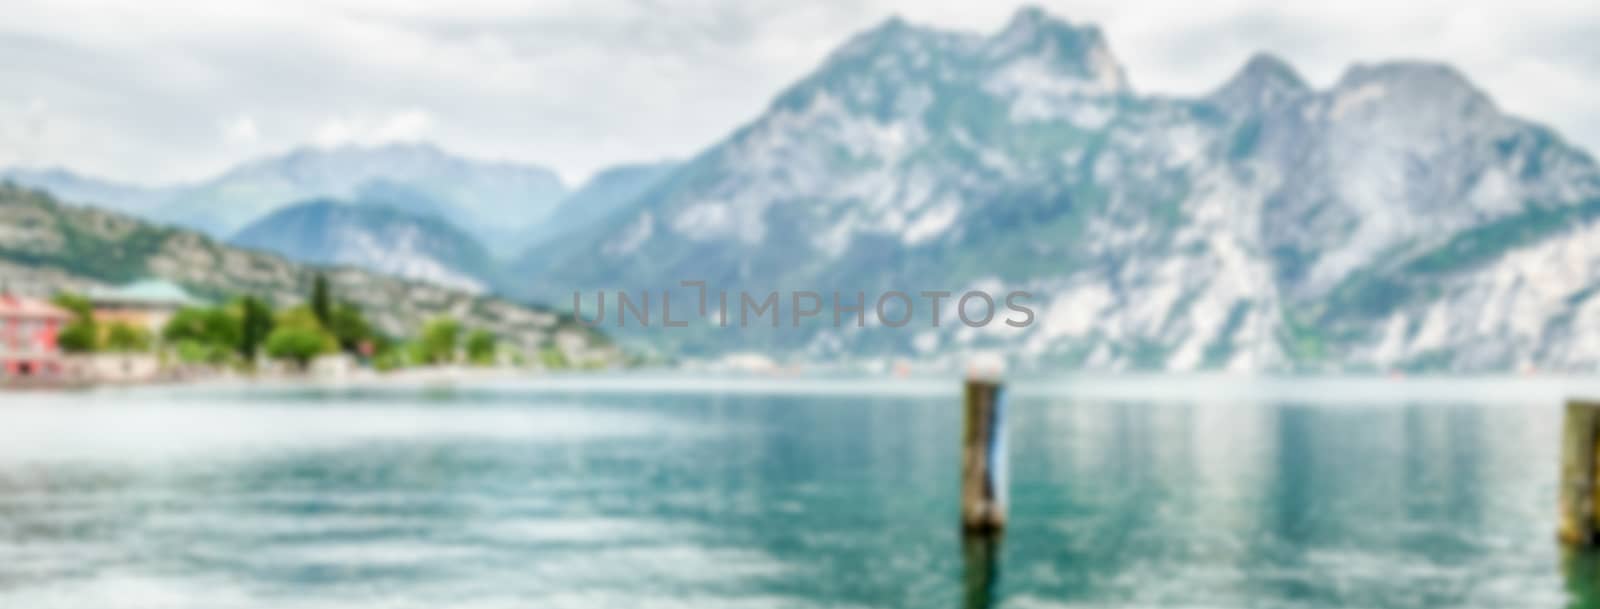 Defocused background over the Lake Garda from the town of Torbole, Italy. Intentionally blurred post production for bokeh effect